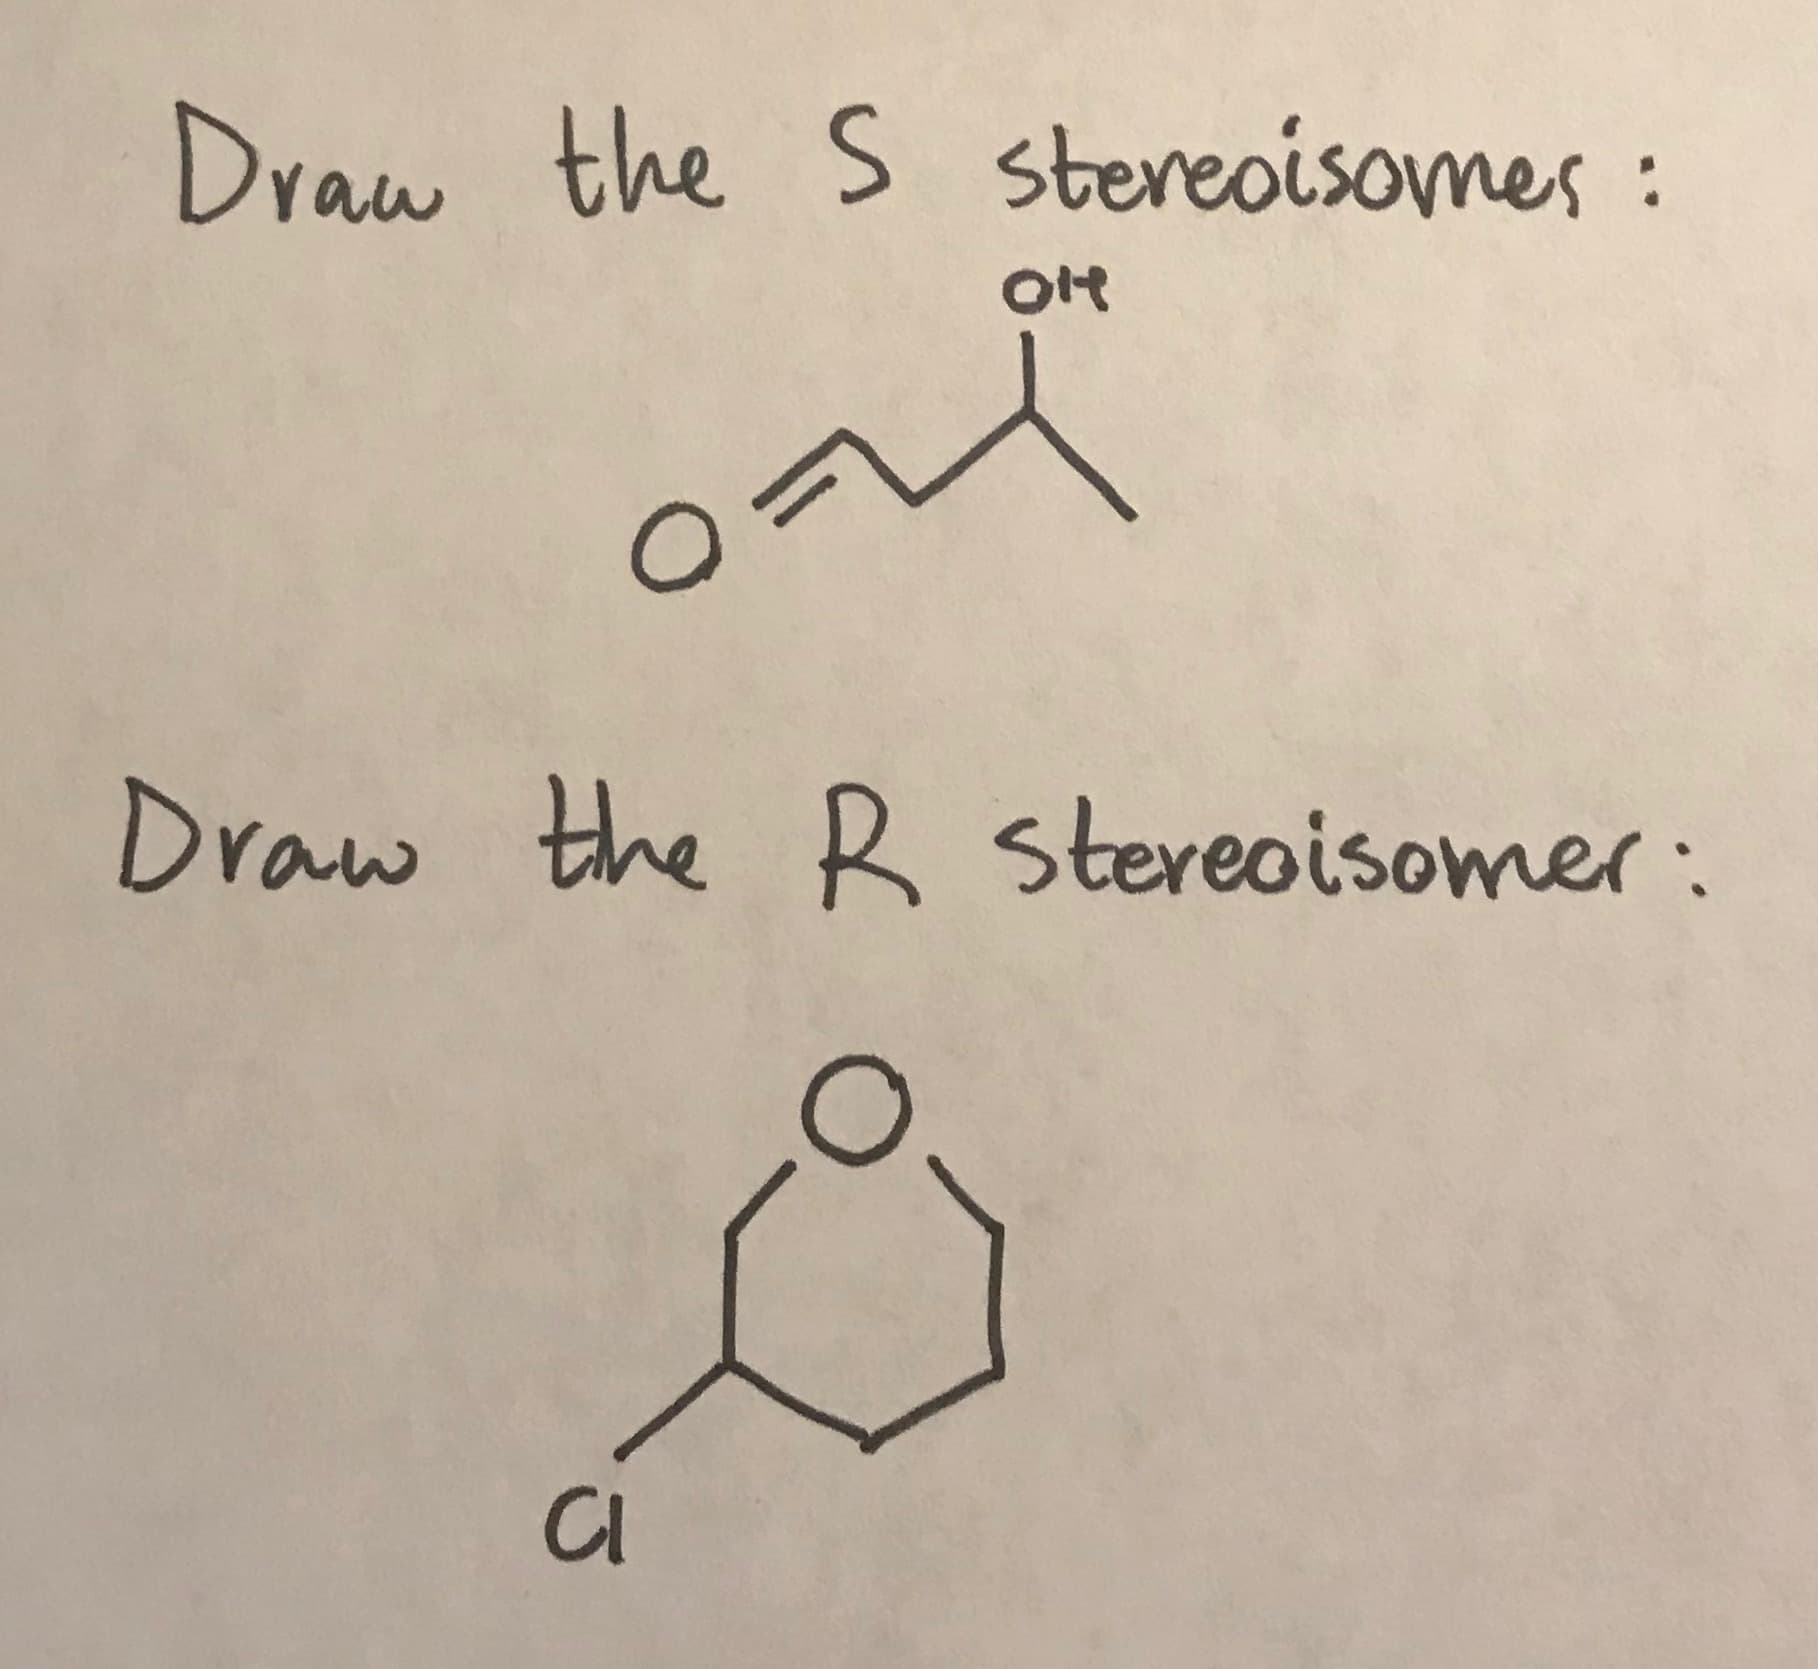 Draw the S
stereoisomes
:
Of
ont
Draw the R stereoisomer
